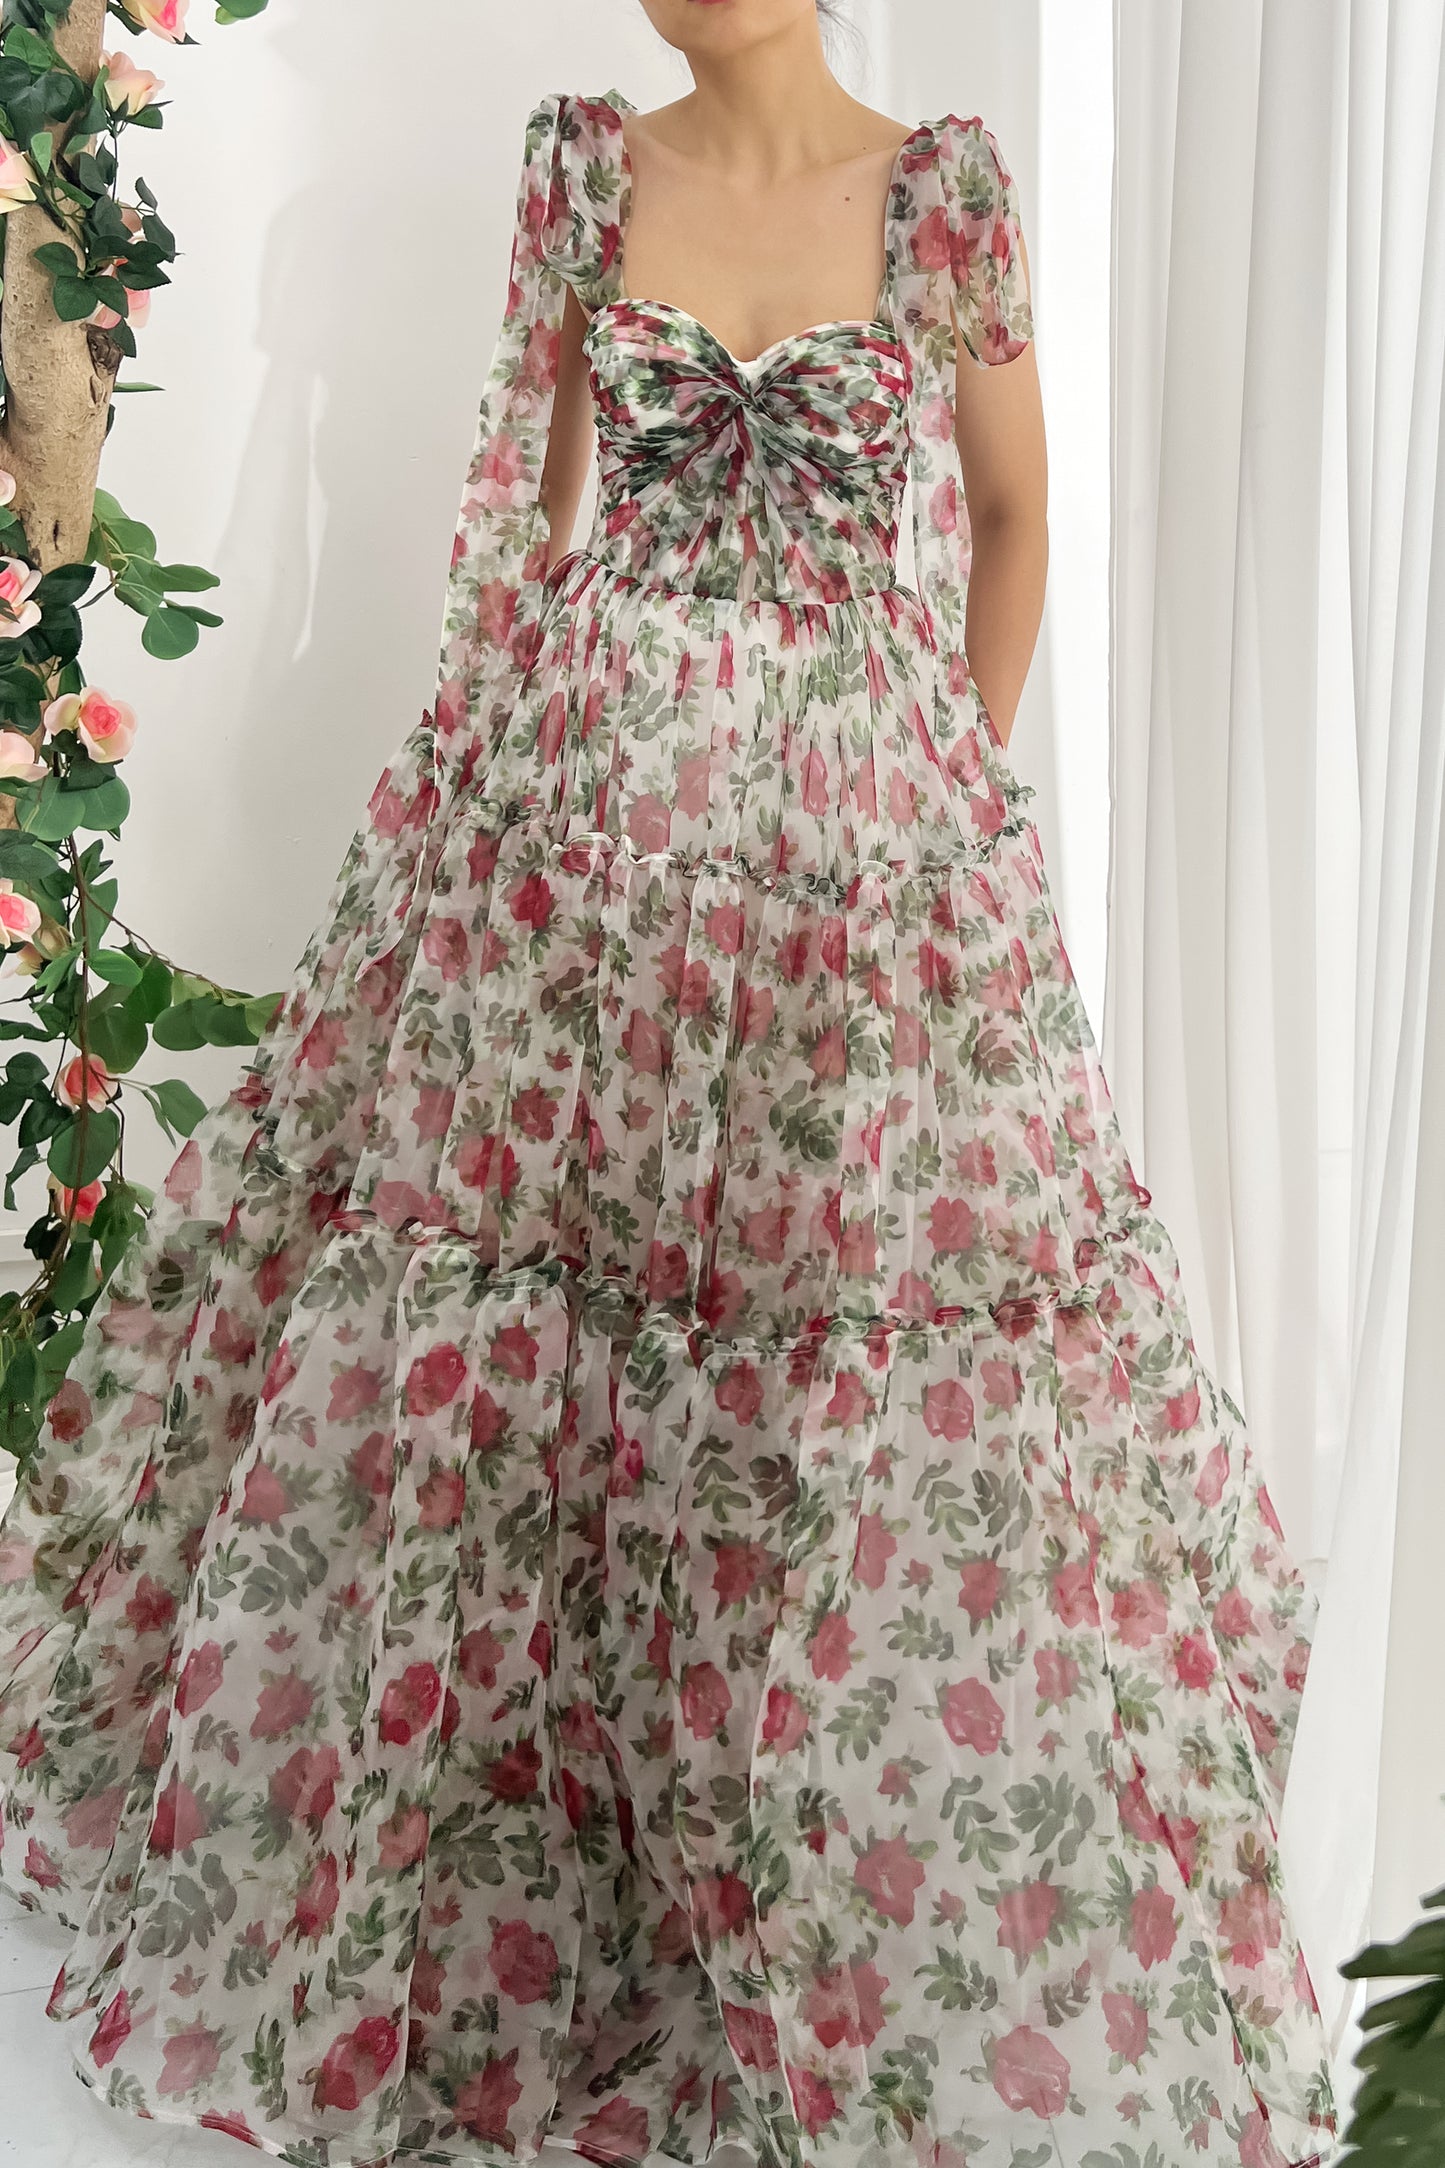 Strapless Rose Print Organza Dress with Removable Tie Straps